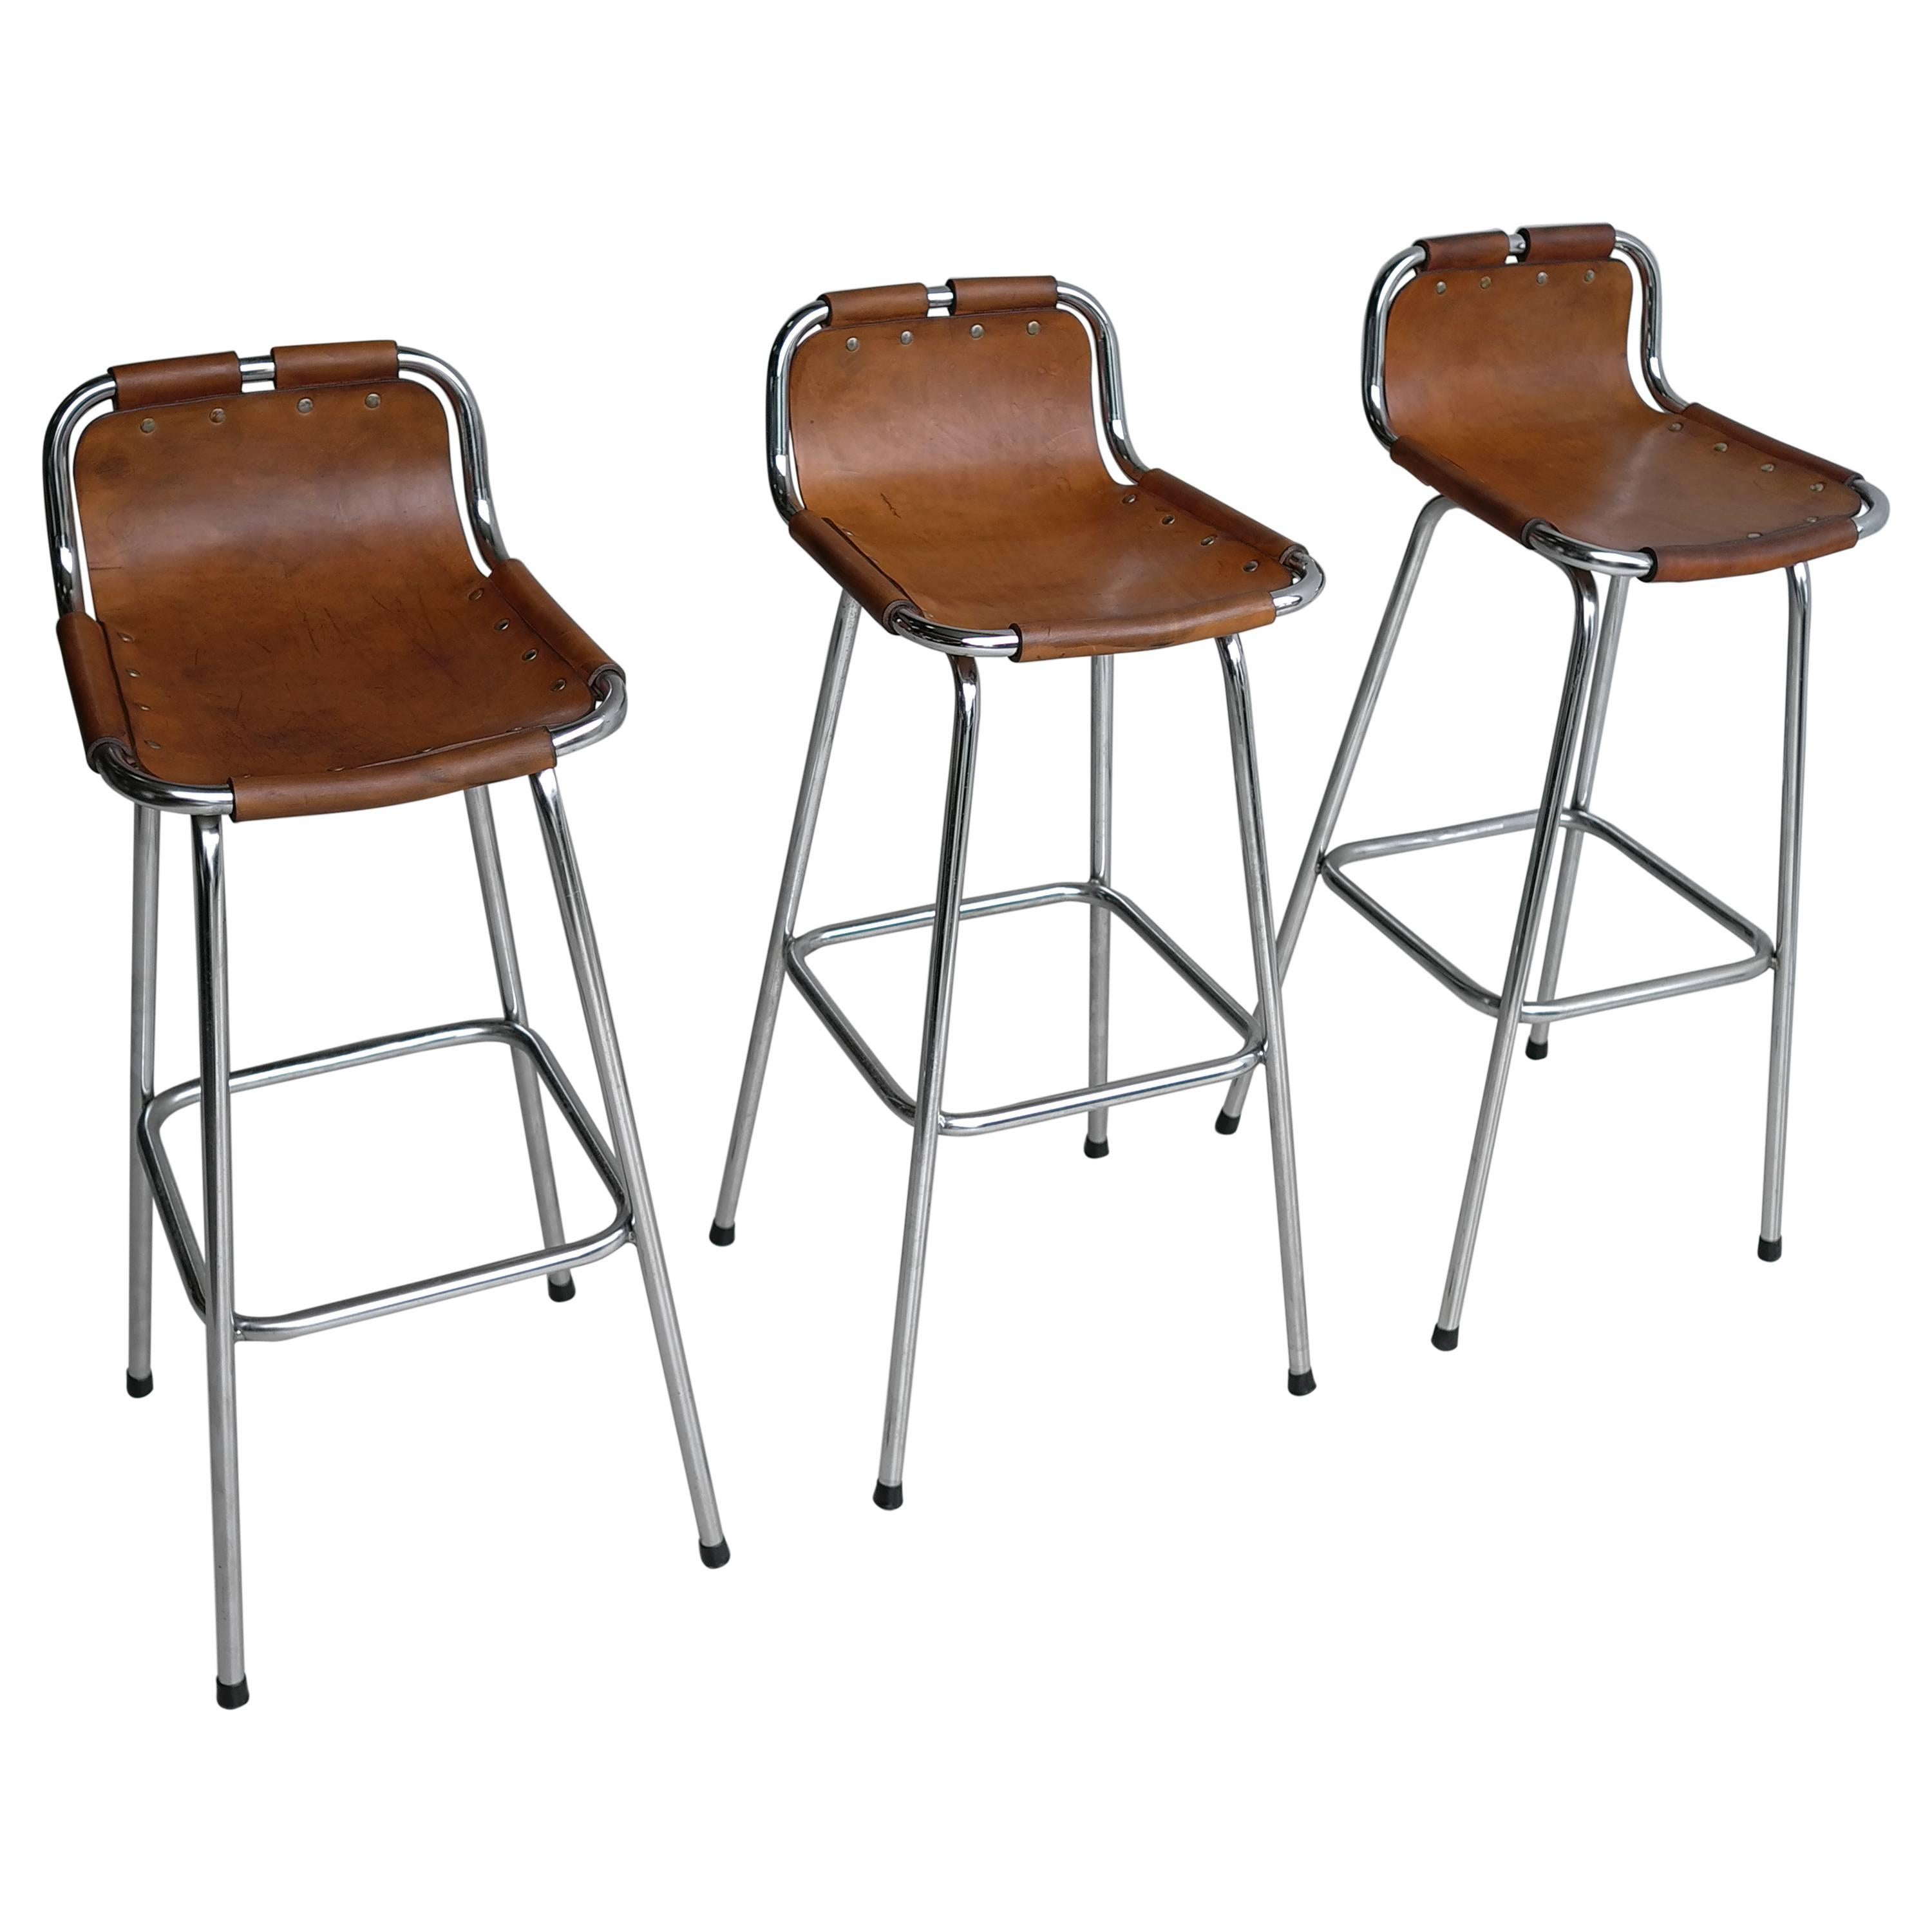 Charlotte Perriand Leather Barstools for Les Arc Ski Resort, France, 1960s